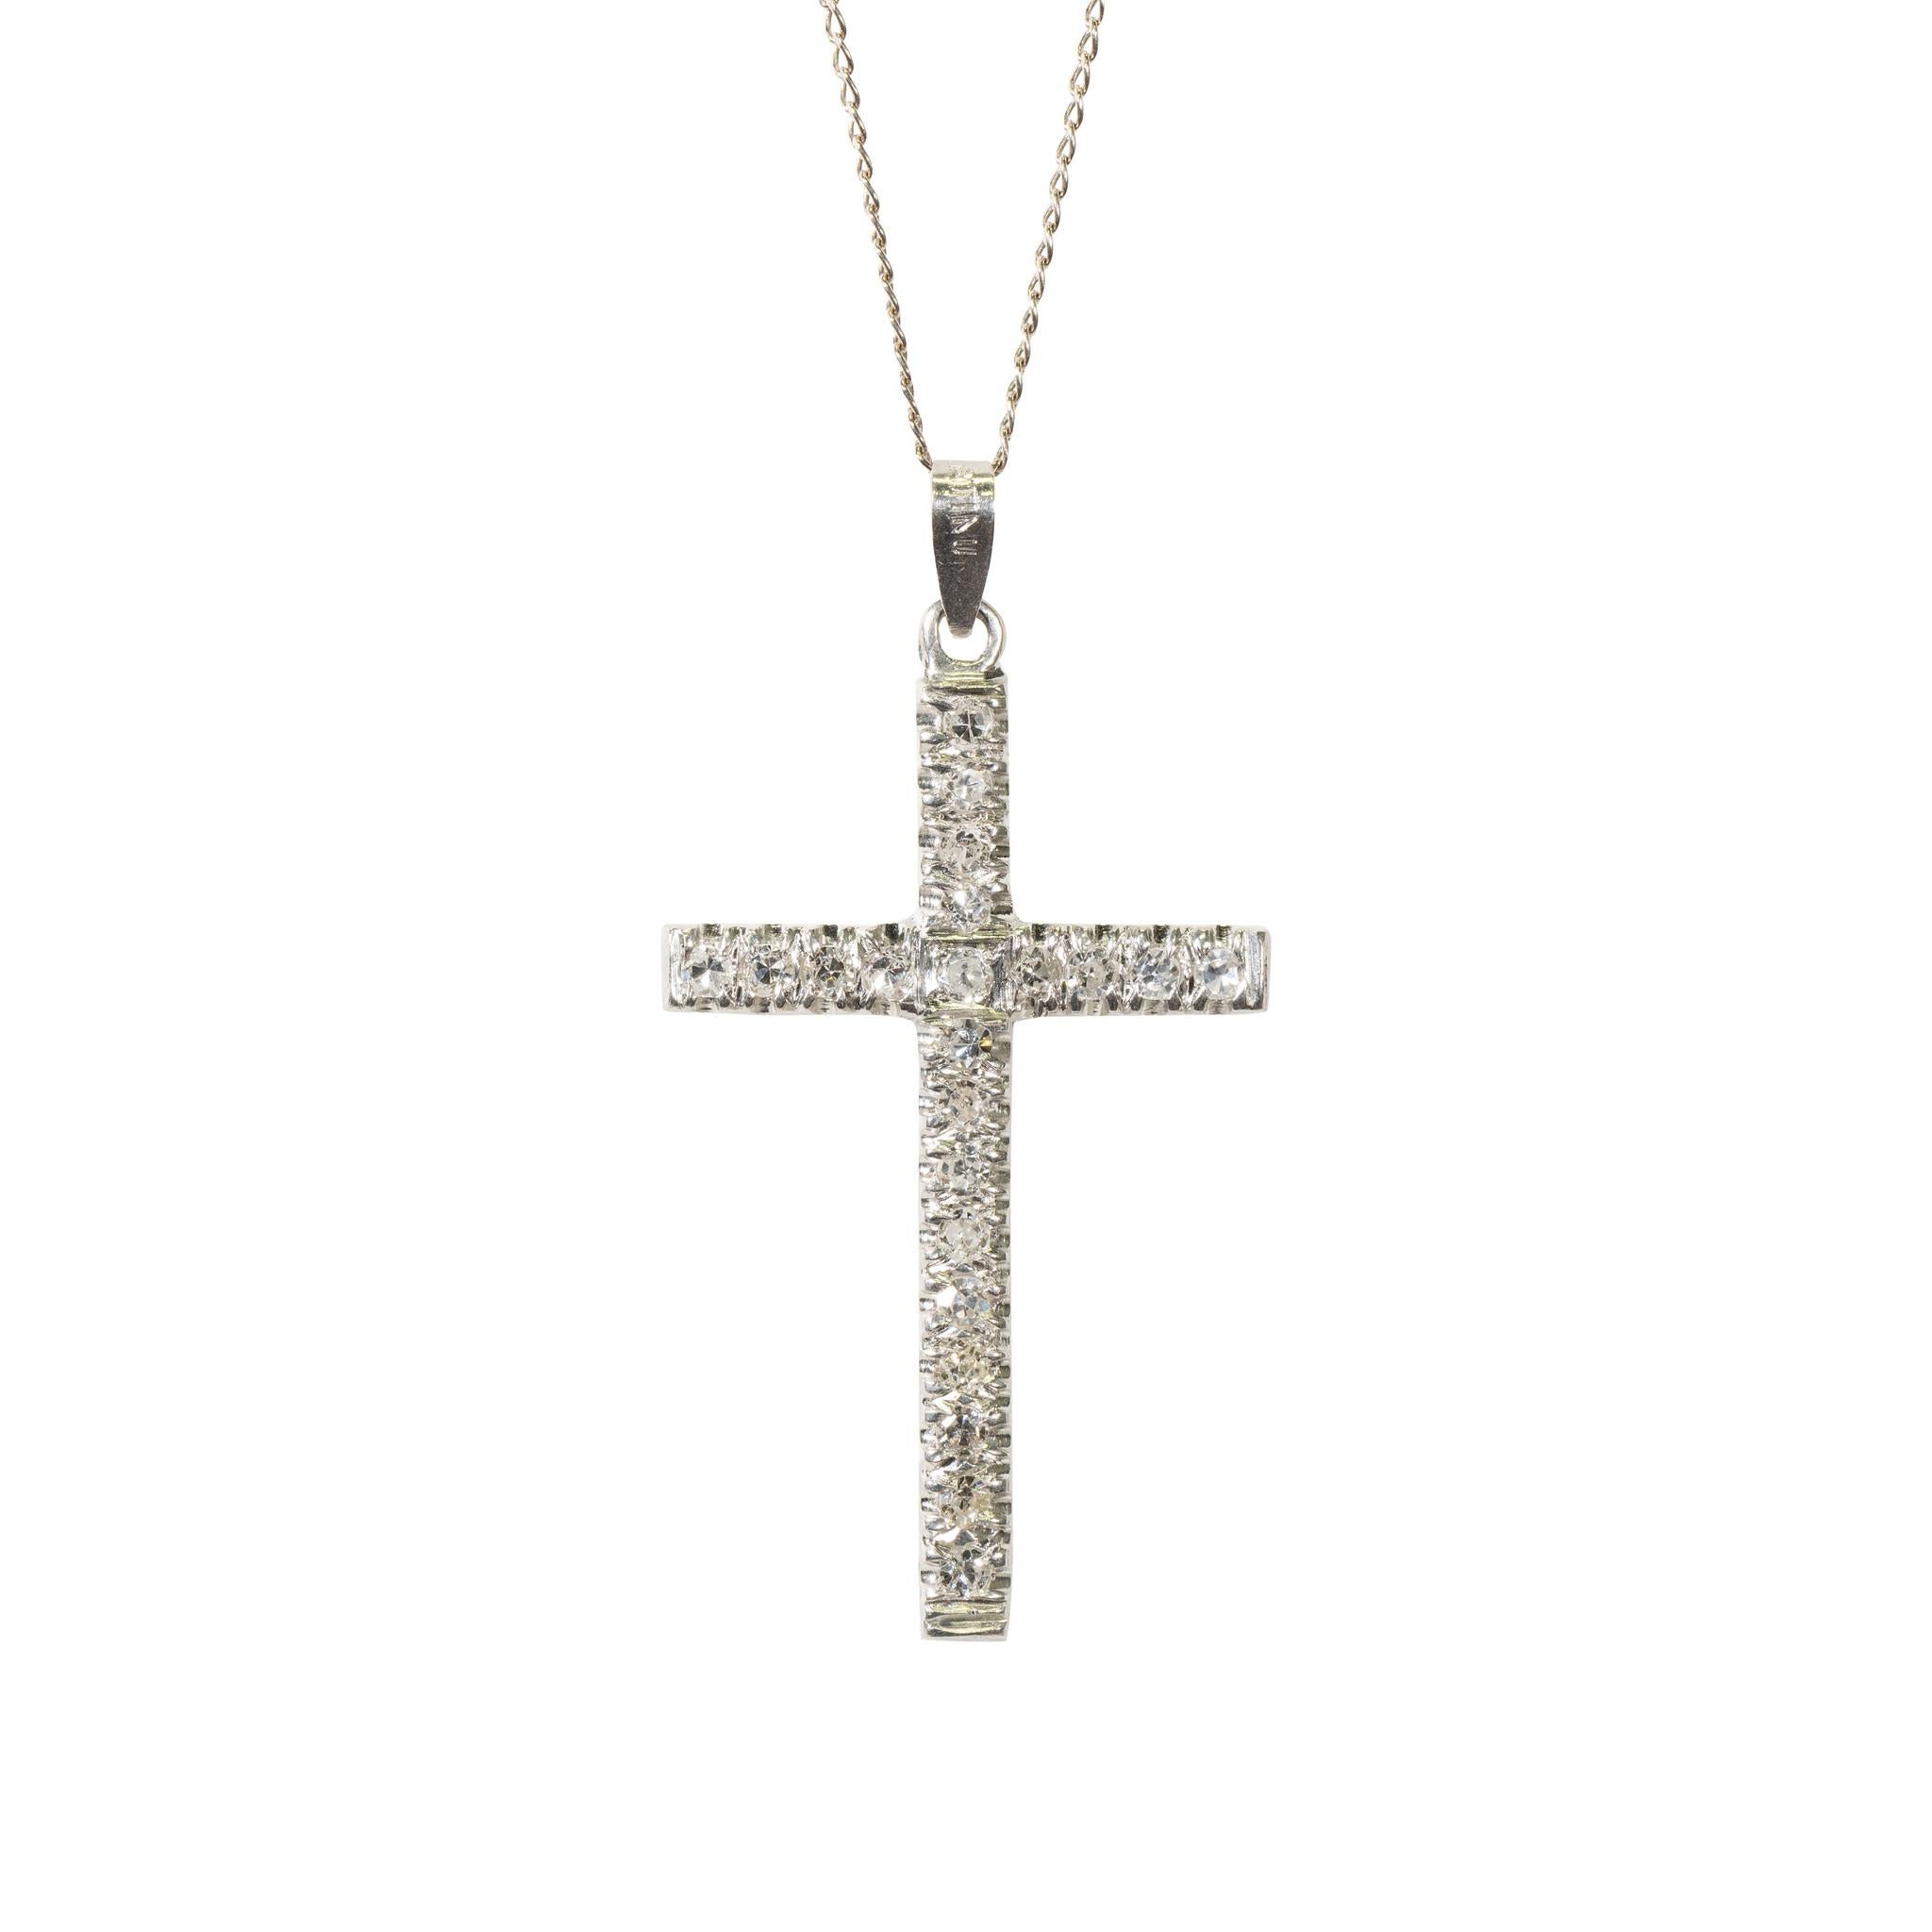 Platinum and diamond cross pendant containing 22 single cut diamonds approximately .50 carats. SL1 Clairity and H Color. Together with an 18